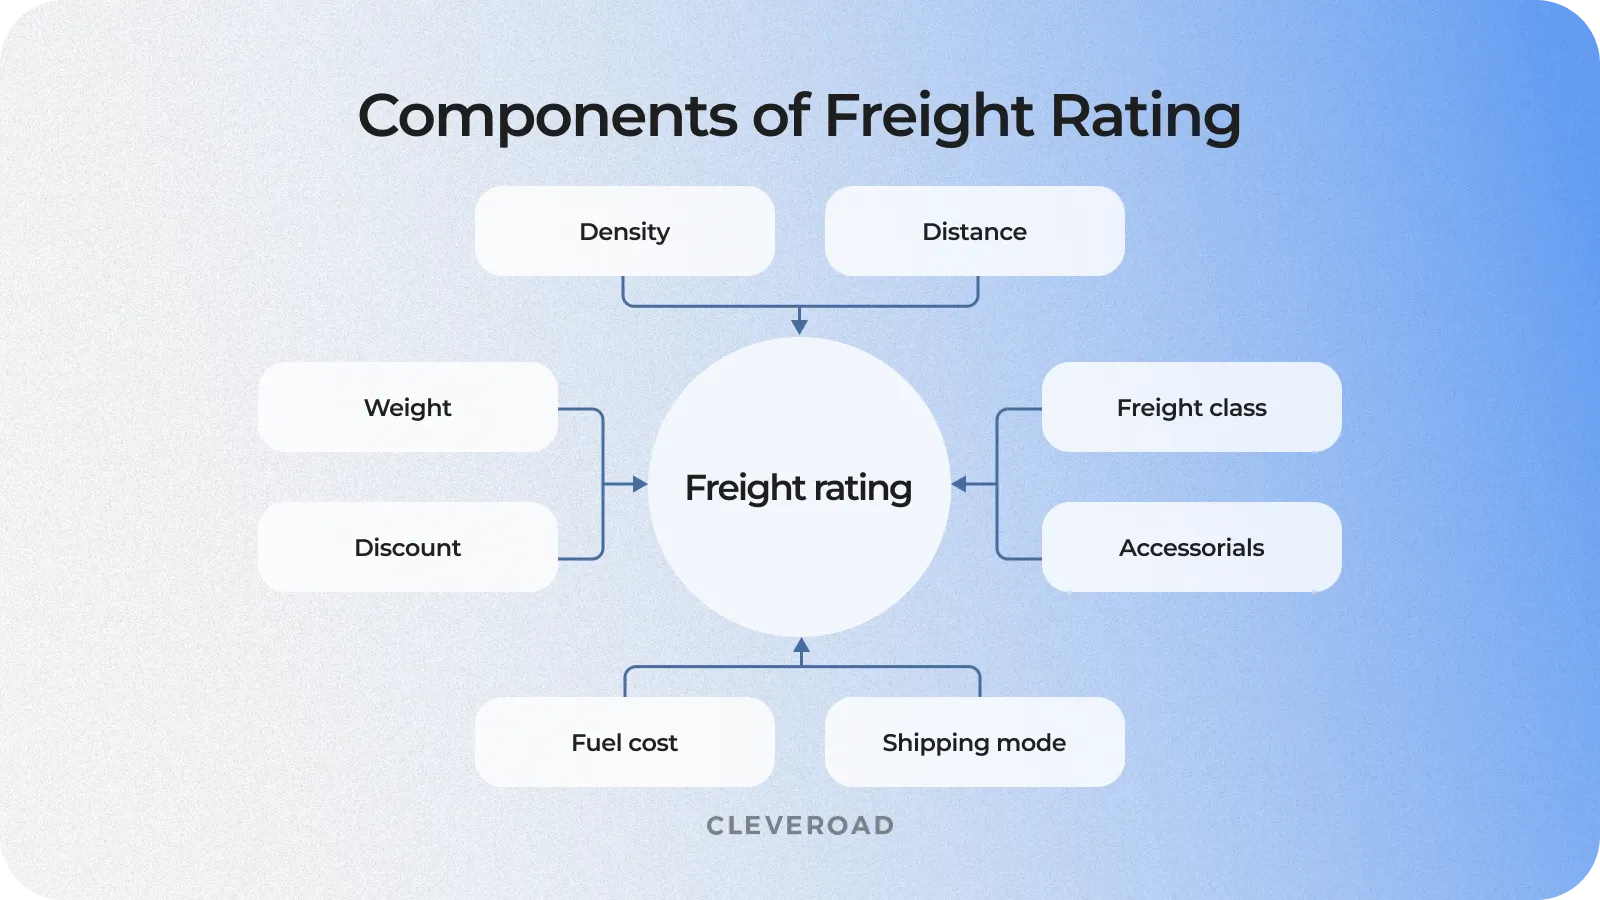 Components of freight rating operated in freight rate management software